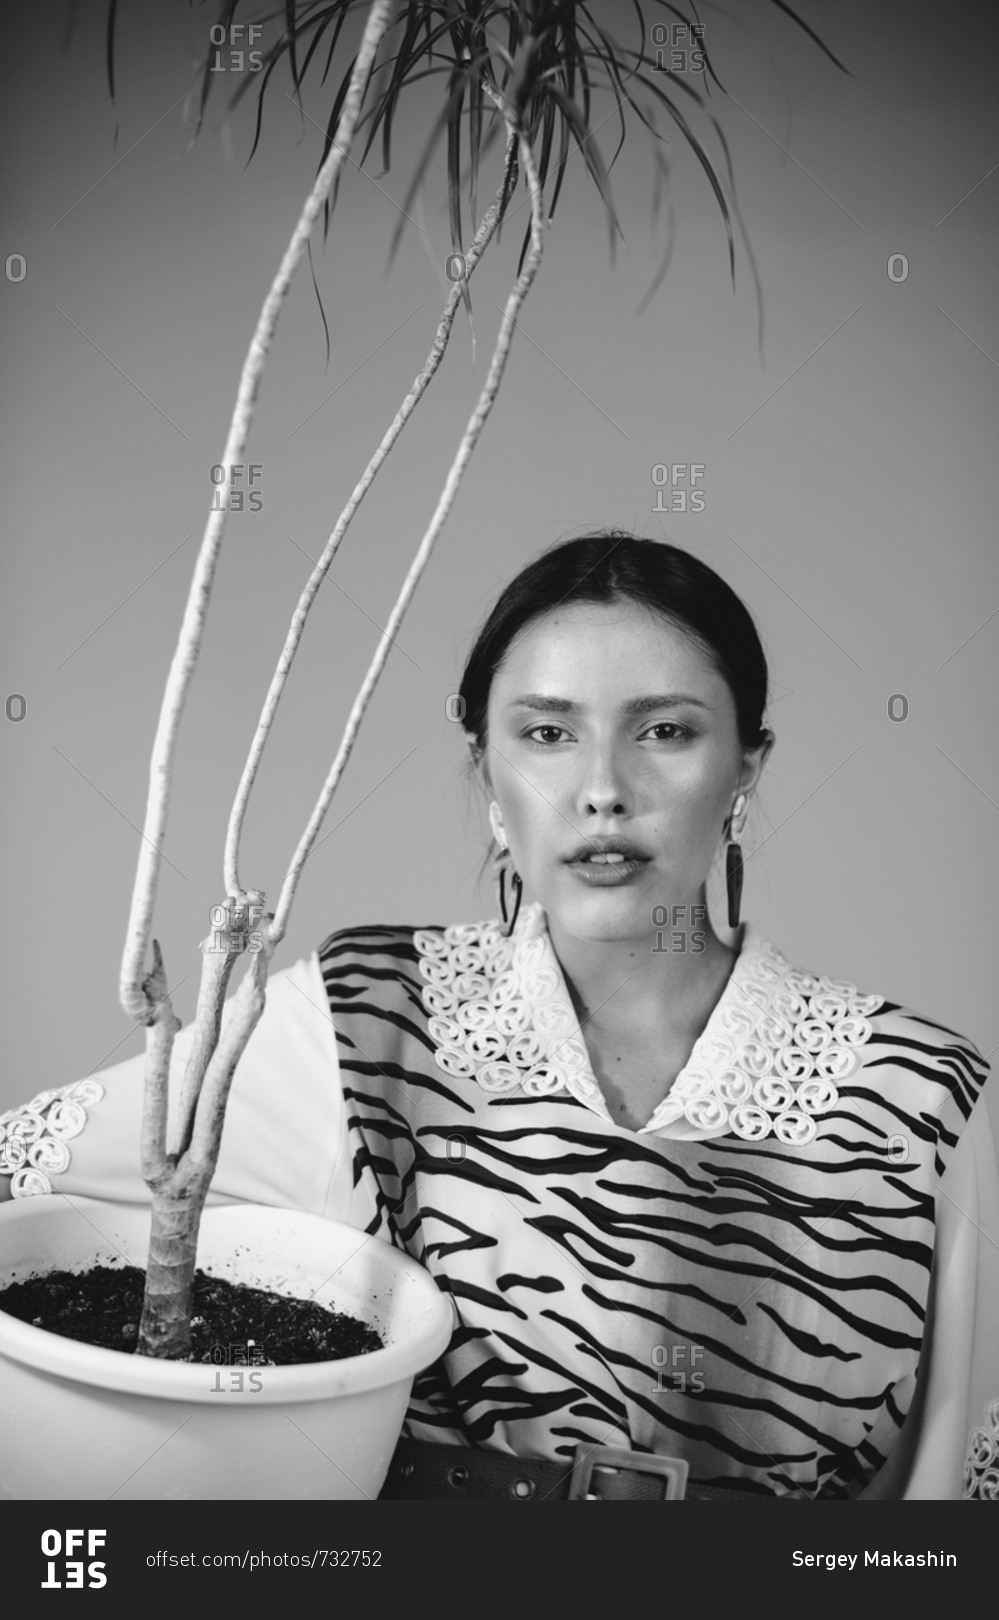 Black and white portrait of a woman in a tiger print dress holding a plant